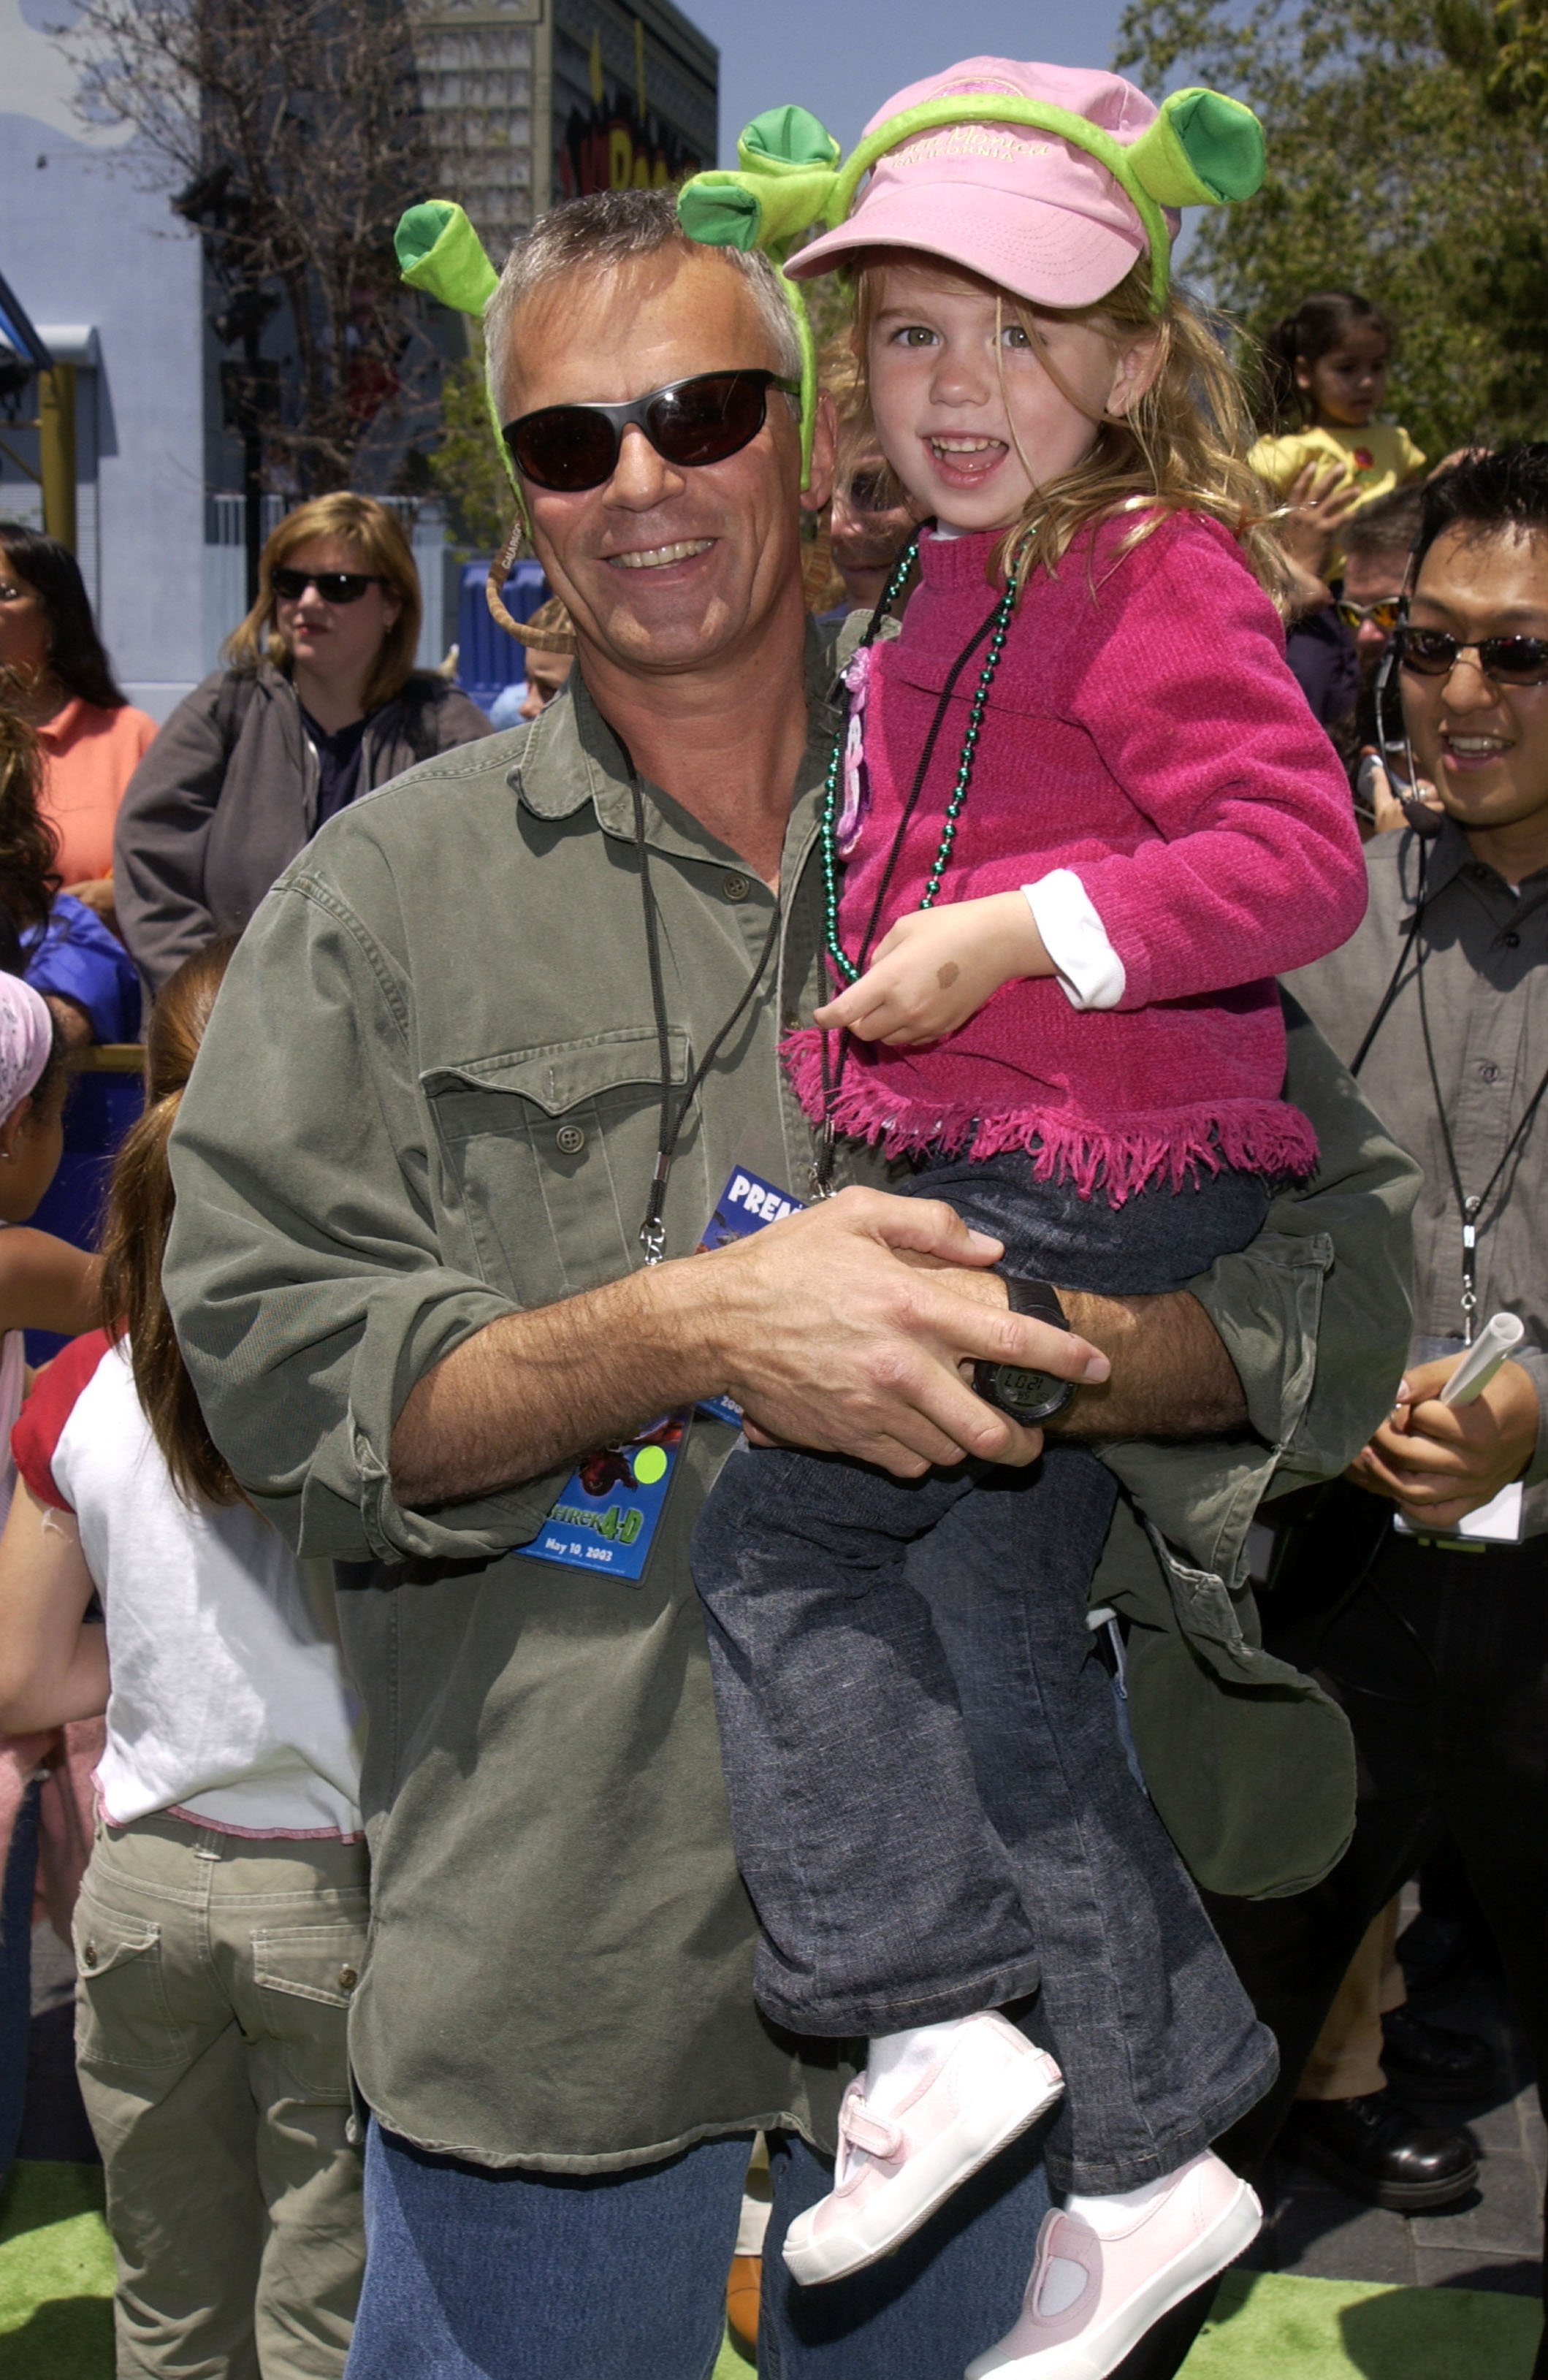 Richard Dean Anderson and his daughter during the premiere of "Shrek 4-D" Attraction in Universal City, California, on May 10, 2003 | Source: Getty Images